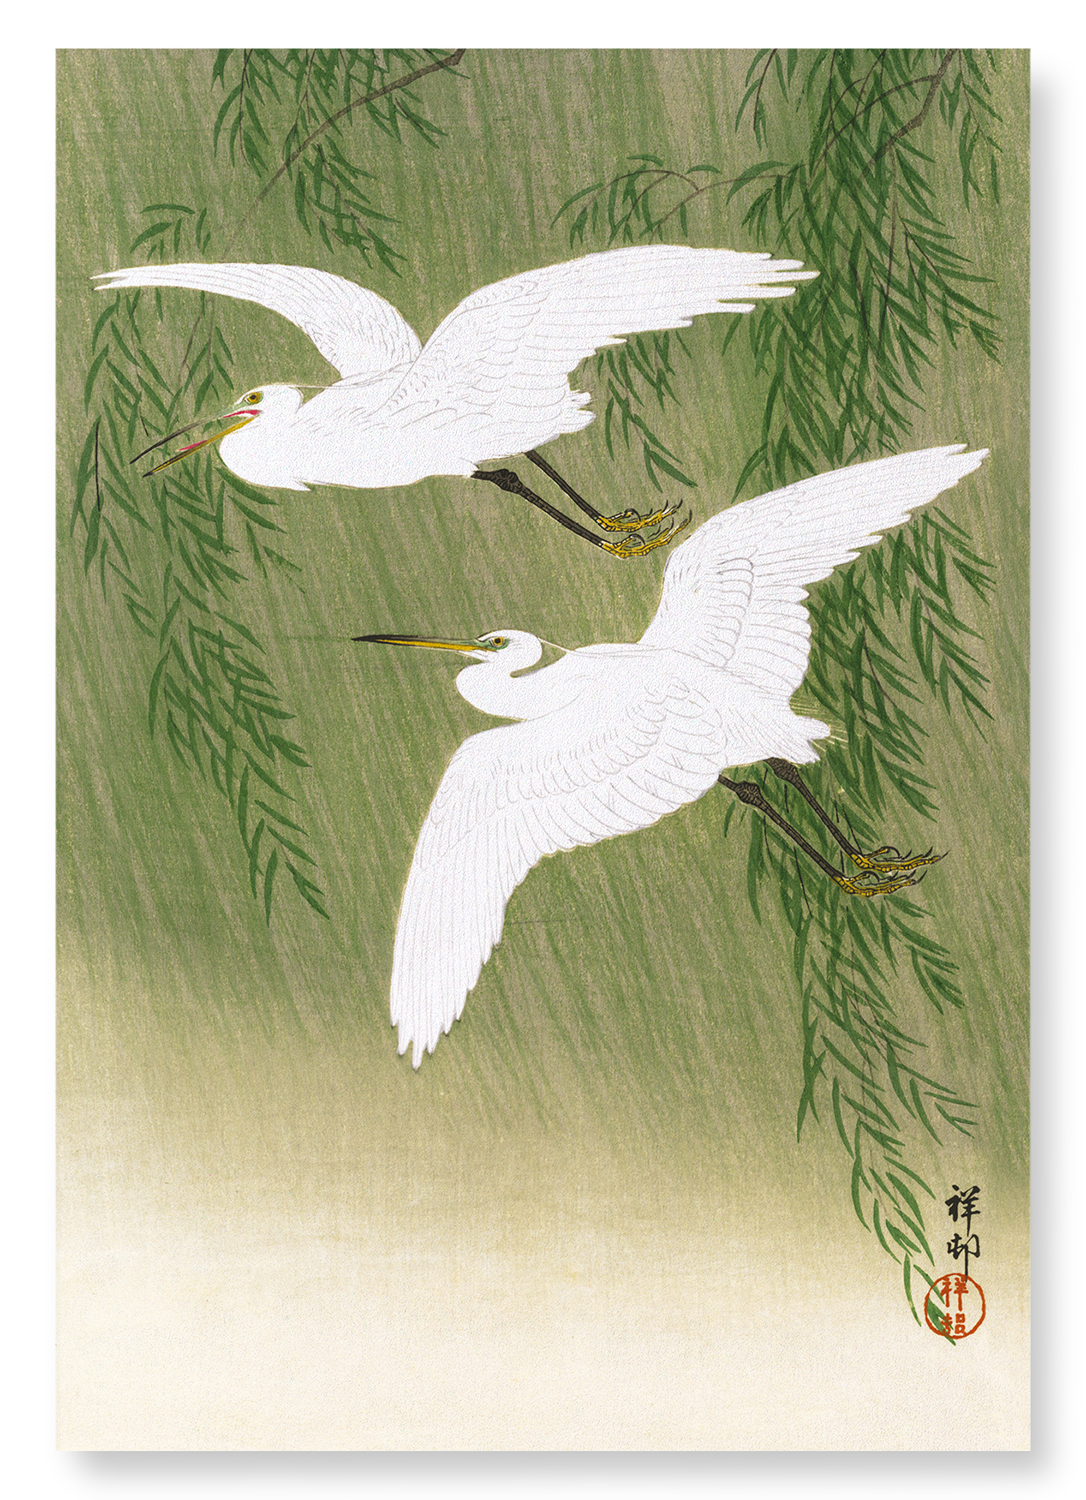 EGRETS AND WILLOW